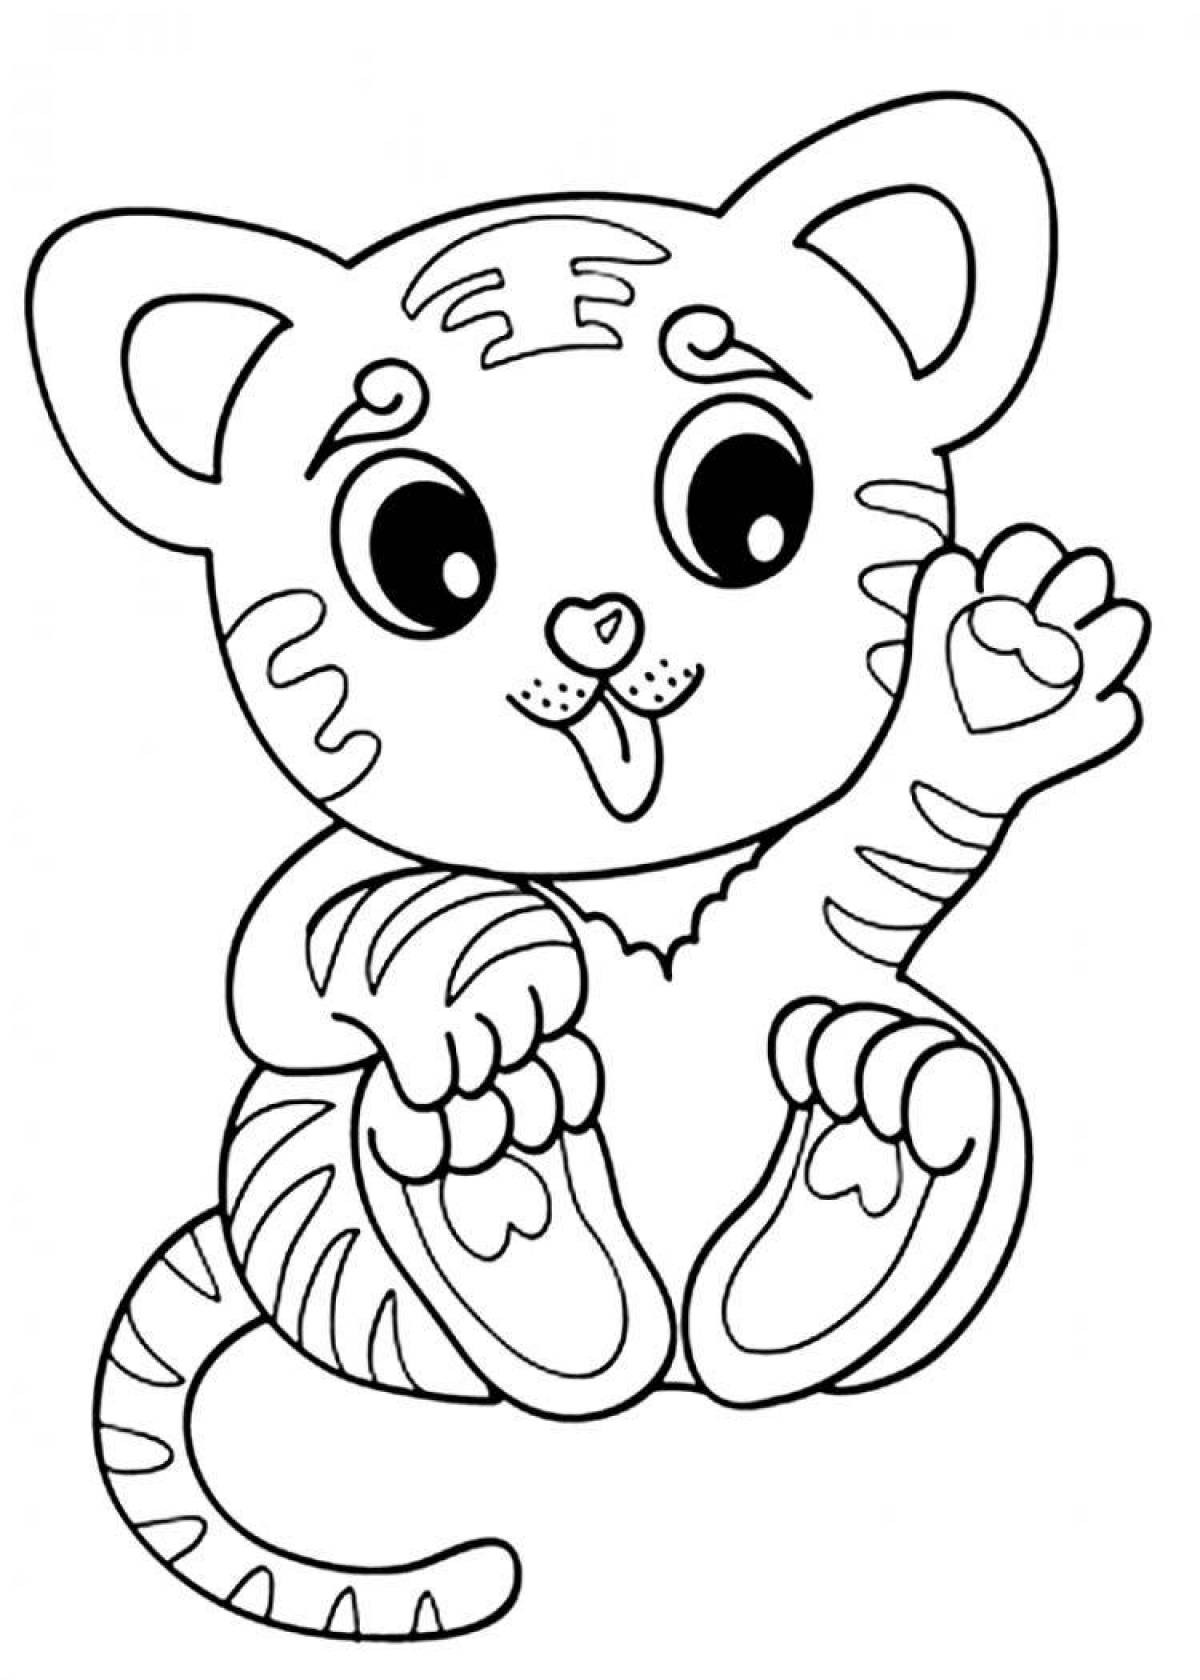 Playful animal coloring for kids